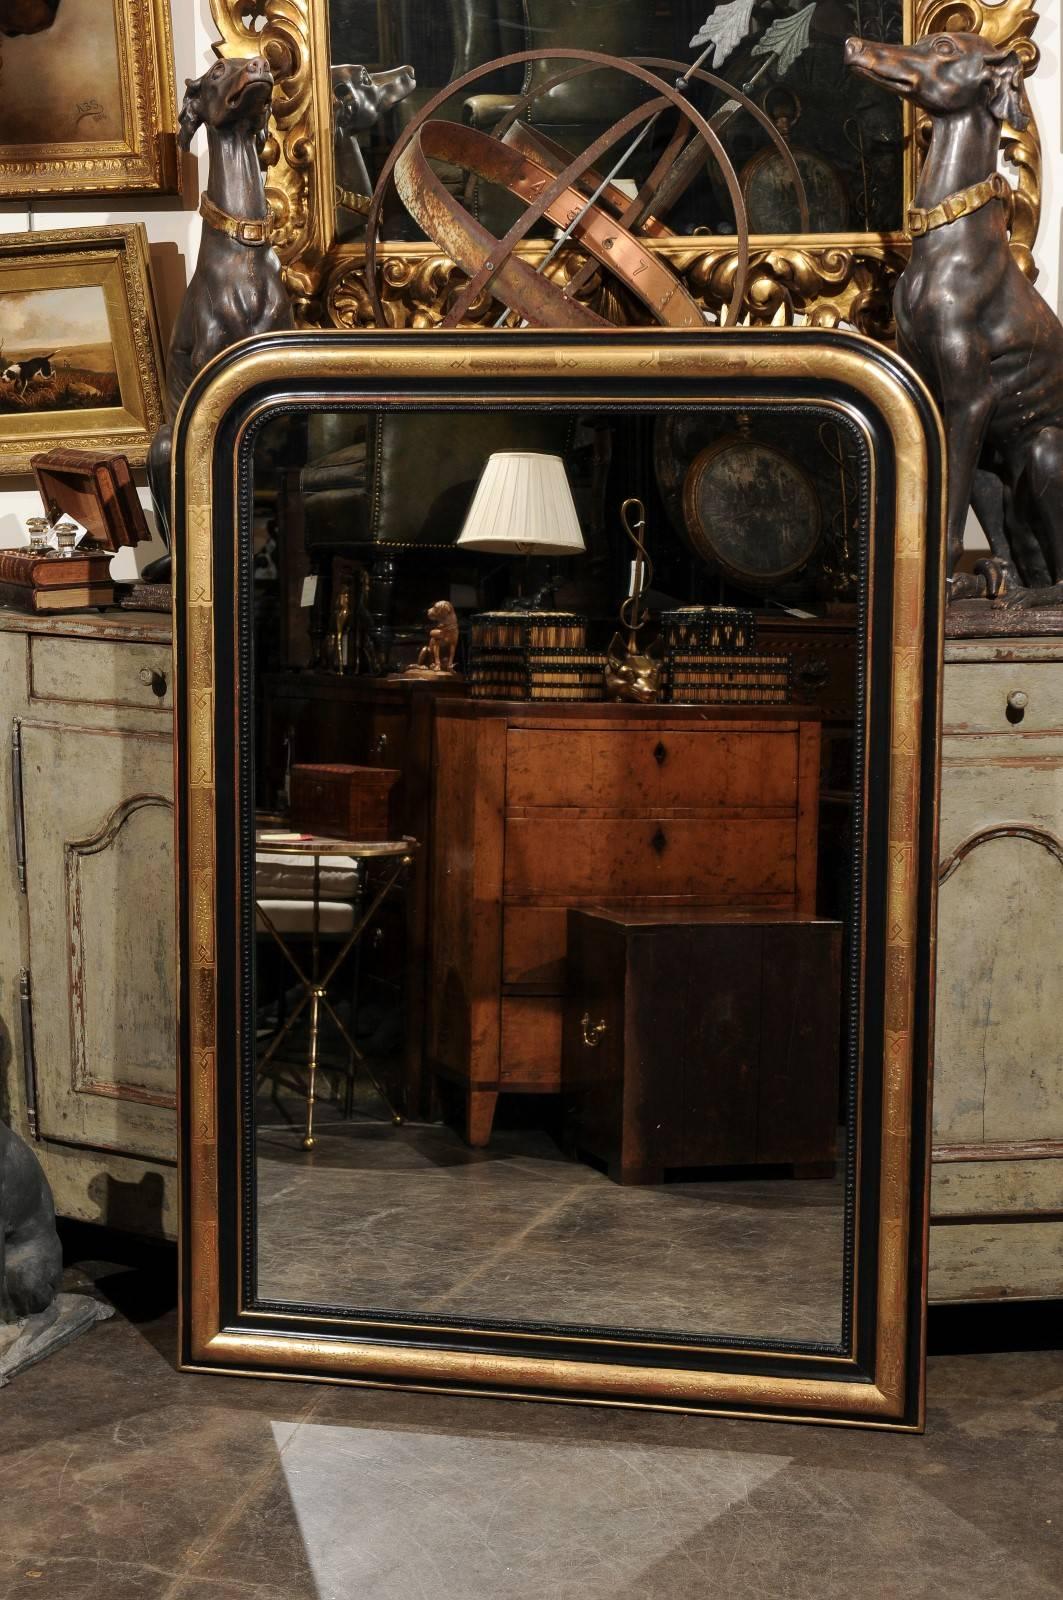 A French Louis-Philippe style black and gold wall mirror from the early 20th century. This French mirror features the typical Louis-Philippe Silhouette, with its simple, yet elegant vertical shape and rounded corners at the top. The mirror shows an